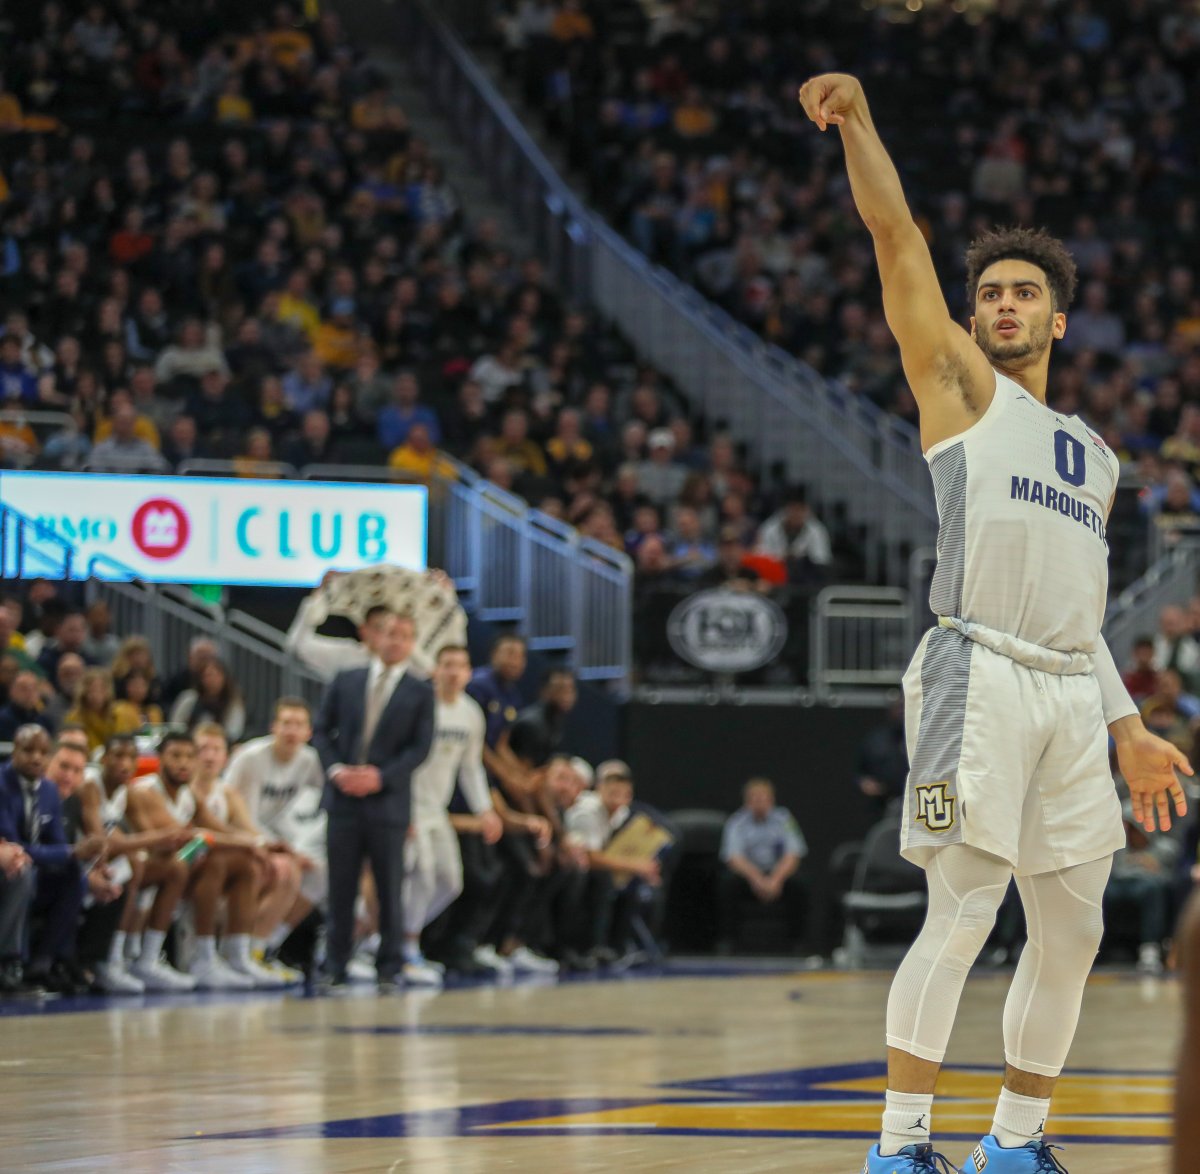 NCAA Hoops Preview: #16 Marquette vs. St. John's